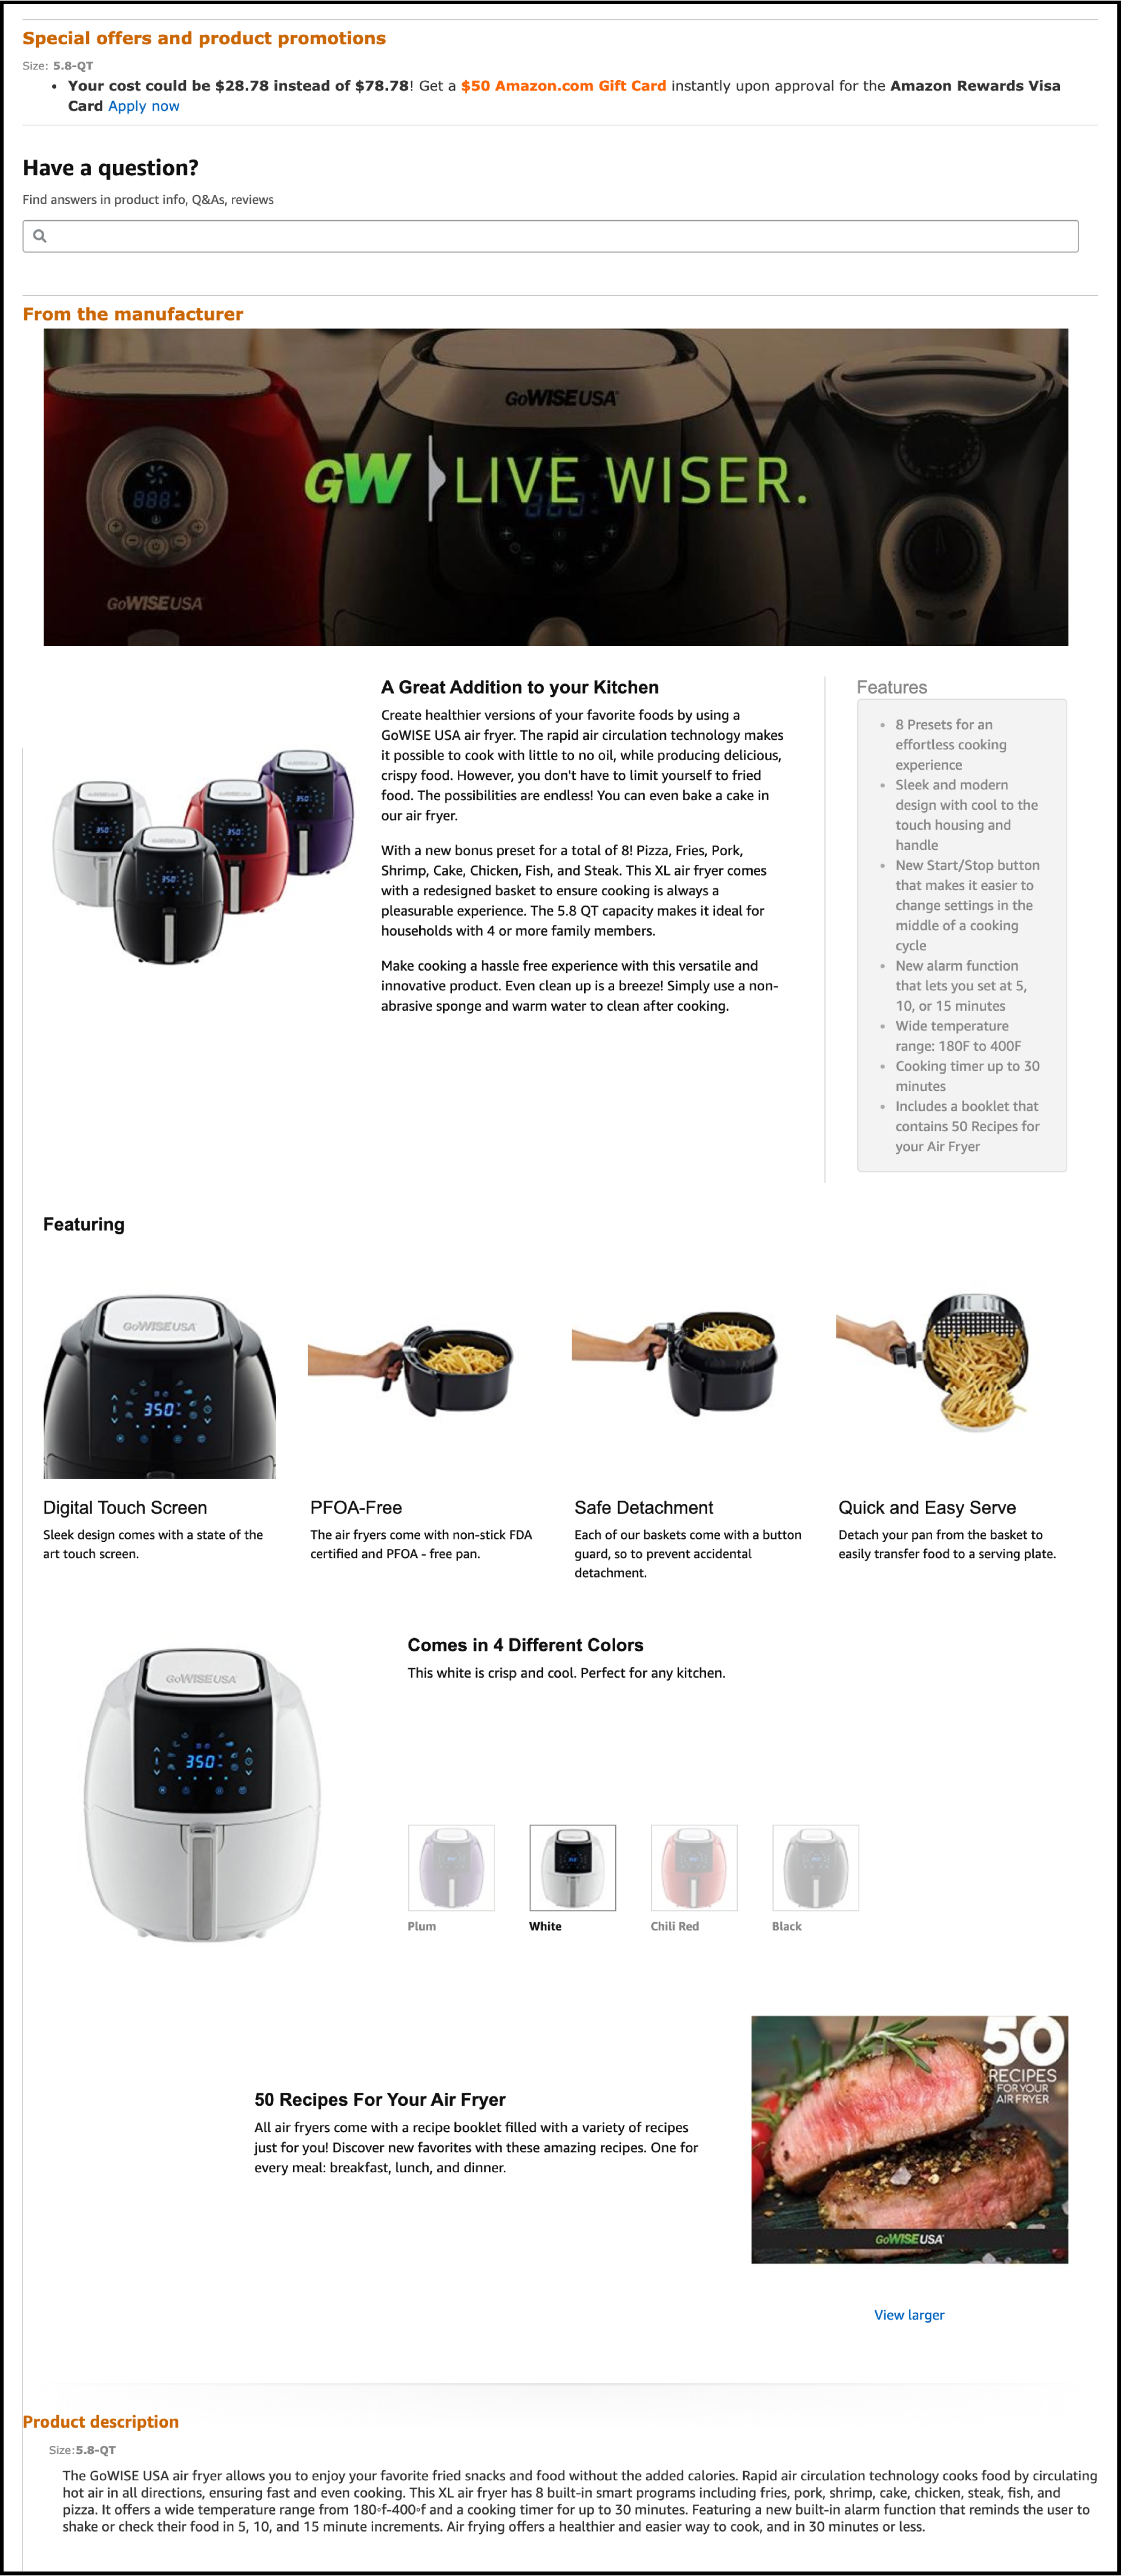 Amazon air fryer. Our idea for improving conversions on this page.